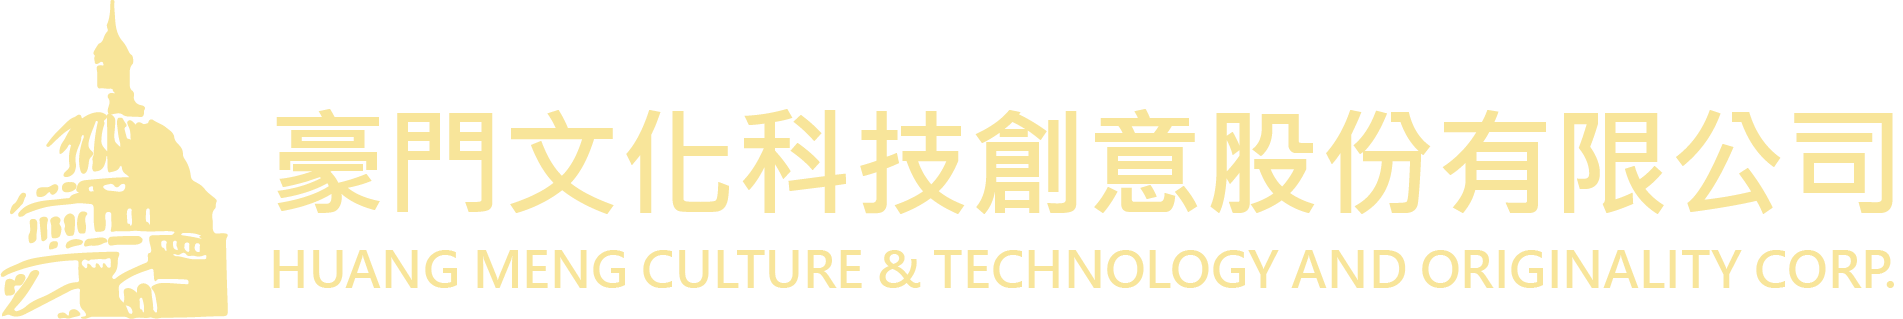 HuangMeng Culture & Technology and Originality Corp.